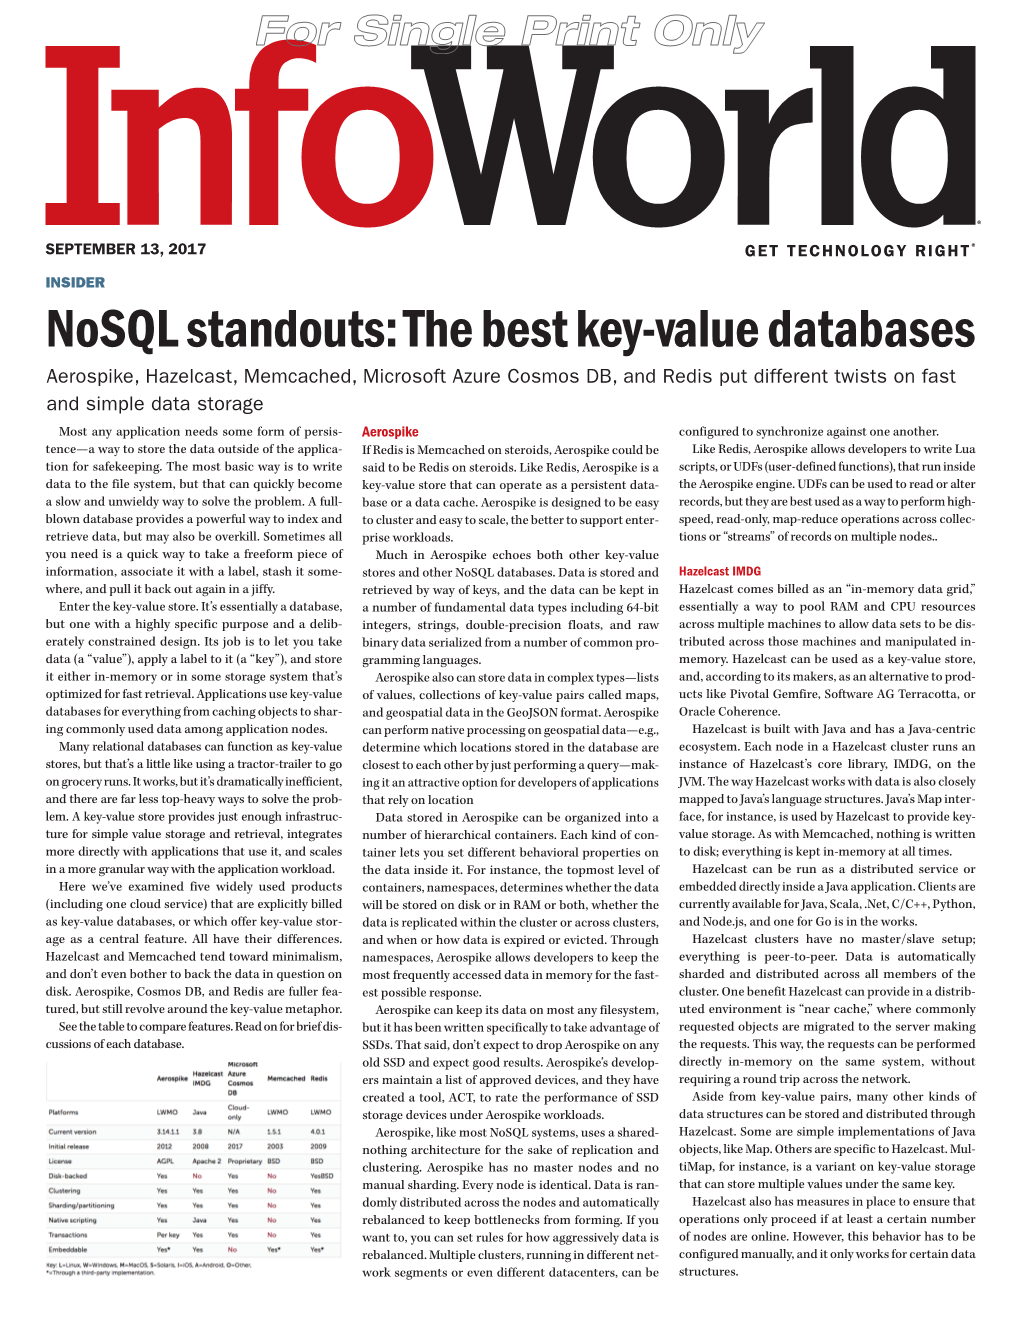 Nosql Standouts: the Best Key-Value Databases